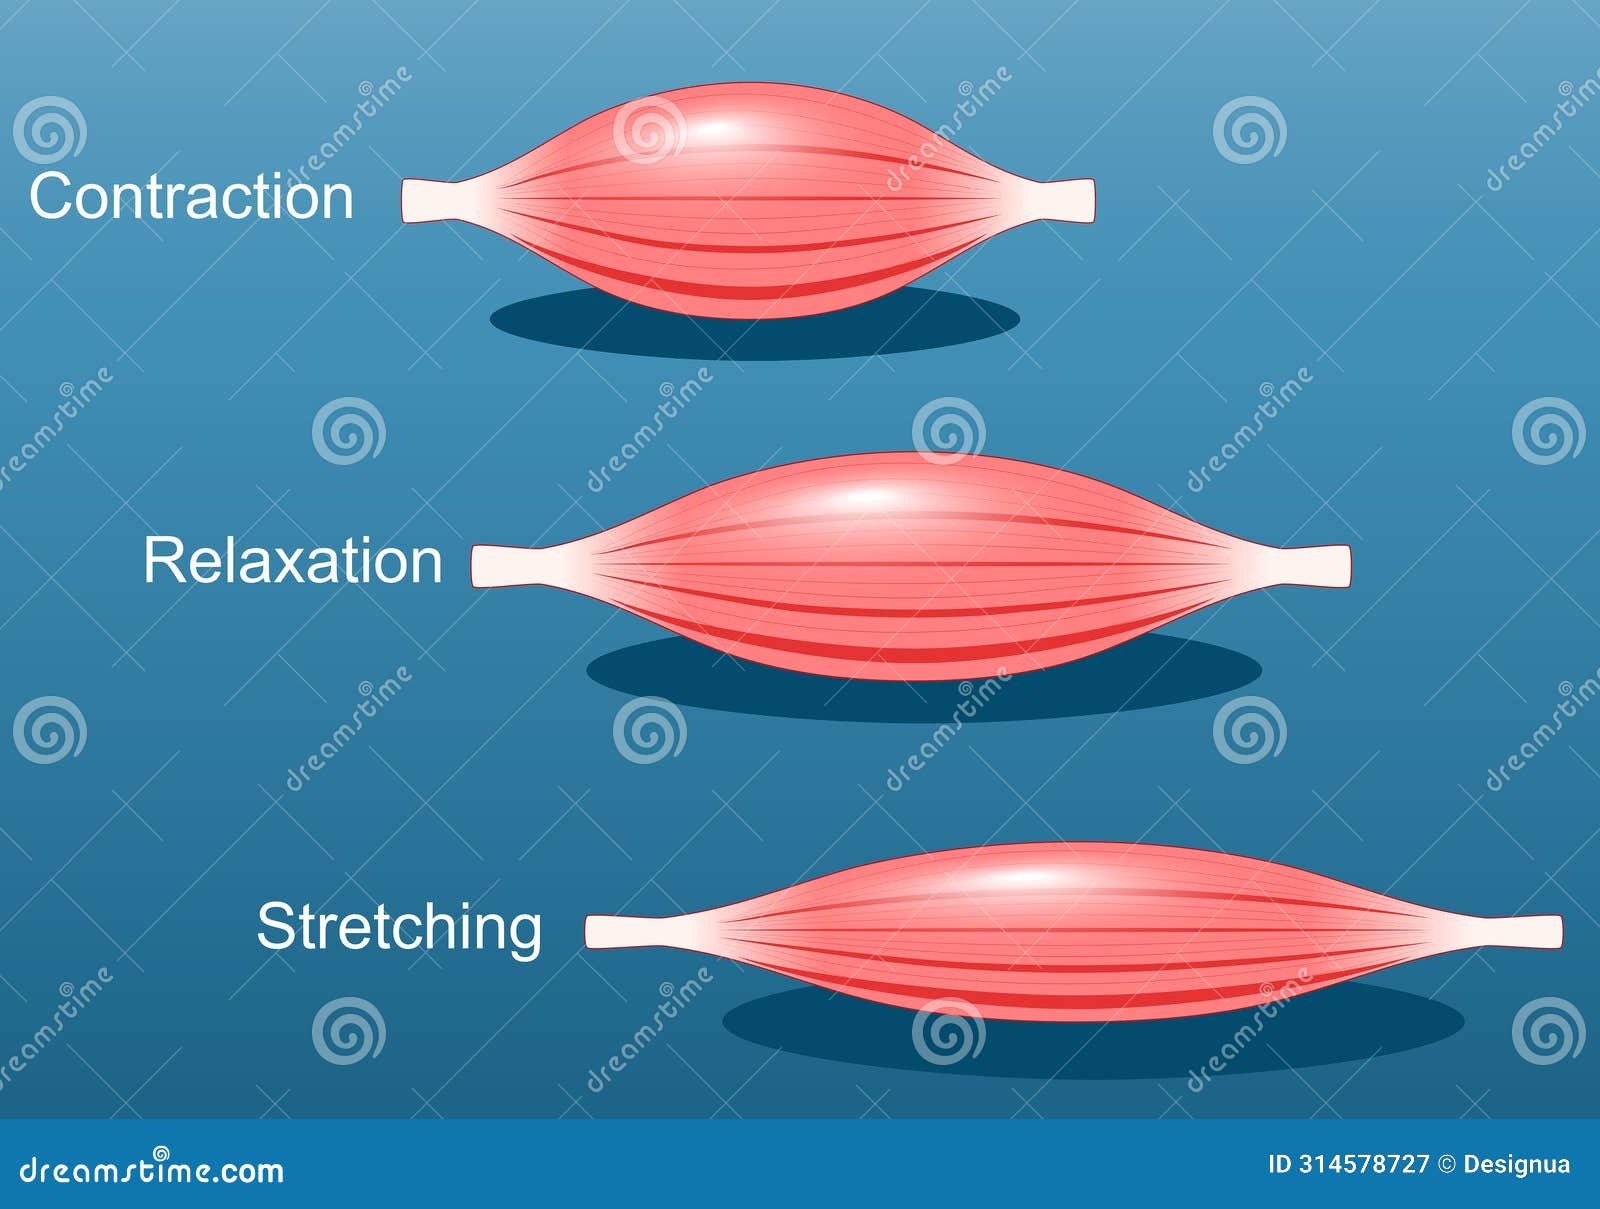 muscle relaxation, stretching, and contraction